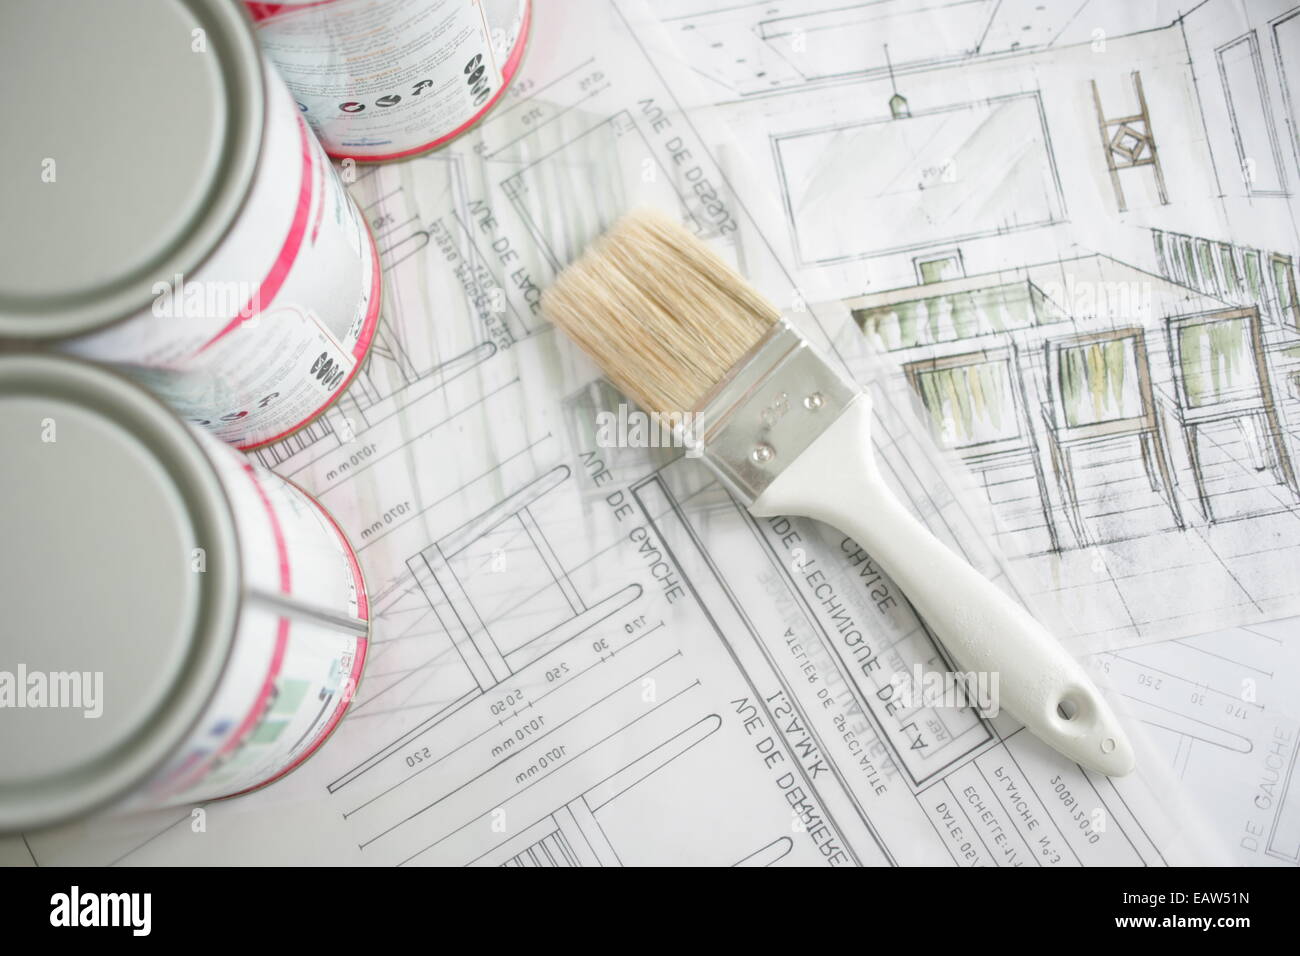 Decorating & Painting tools and materials Stock Photo